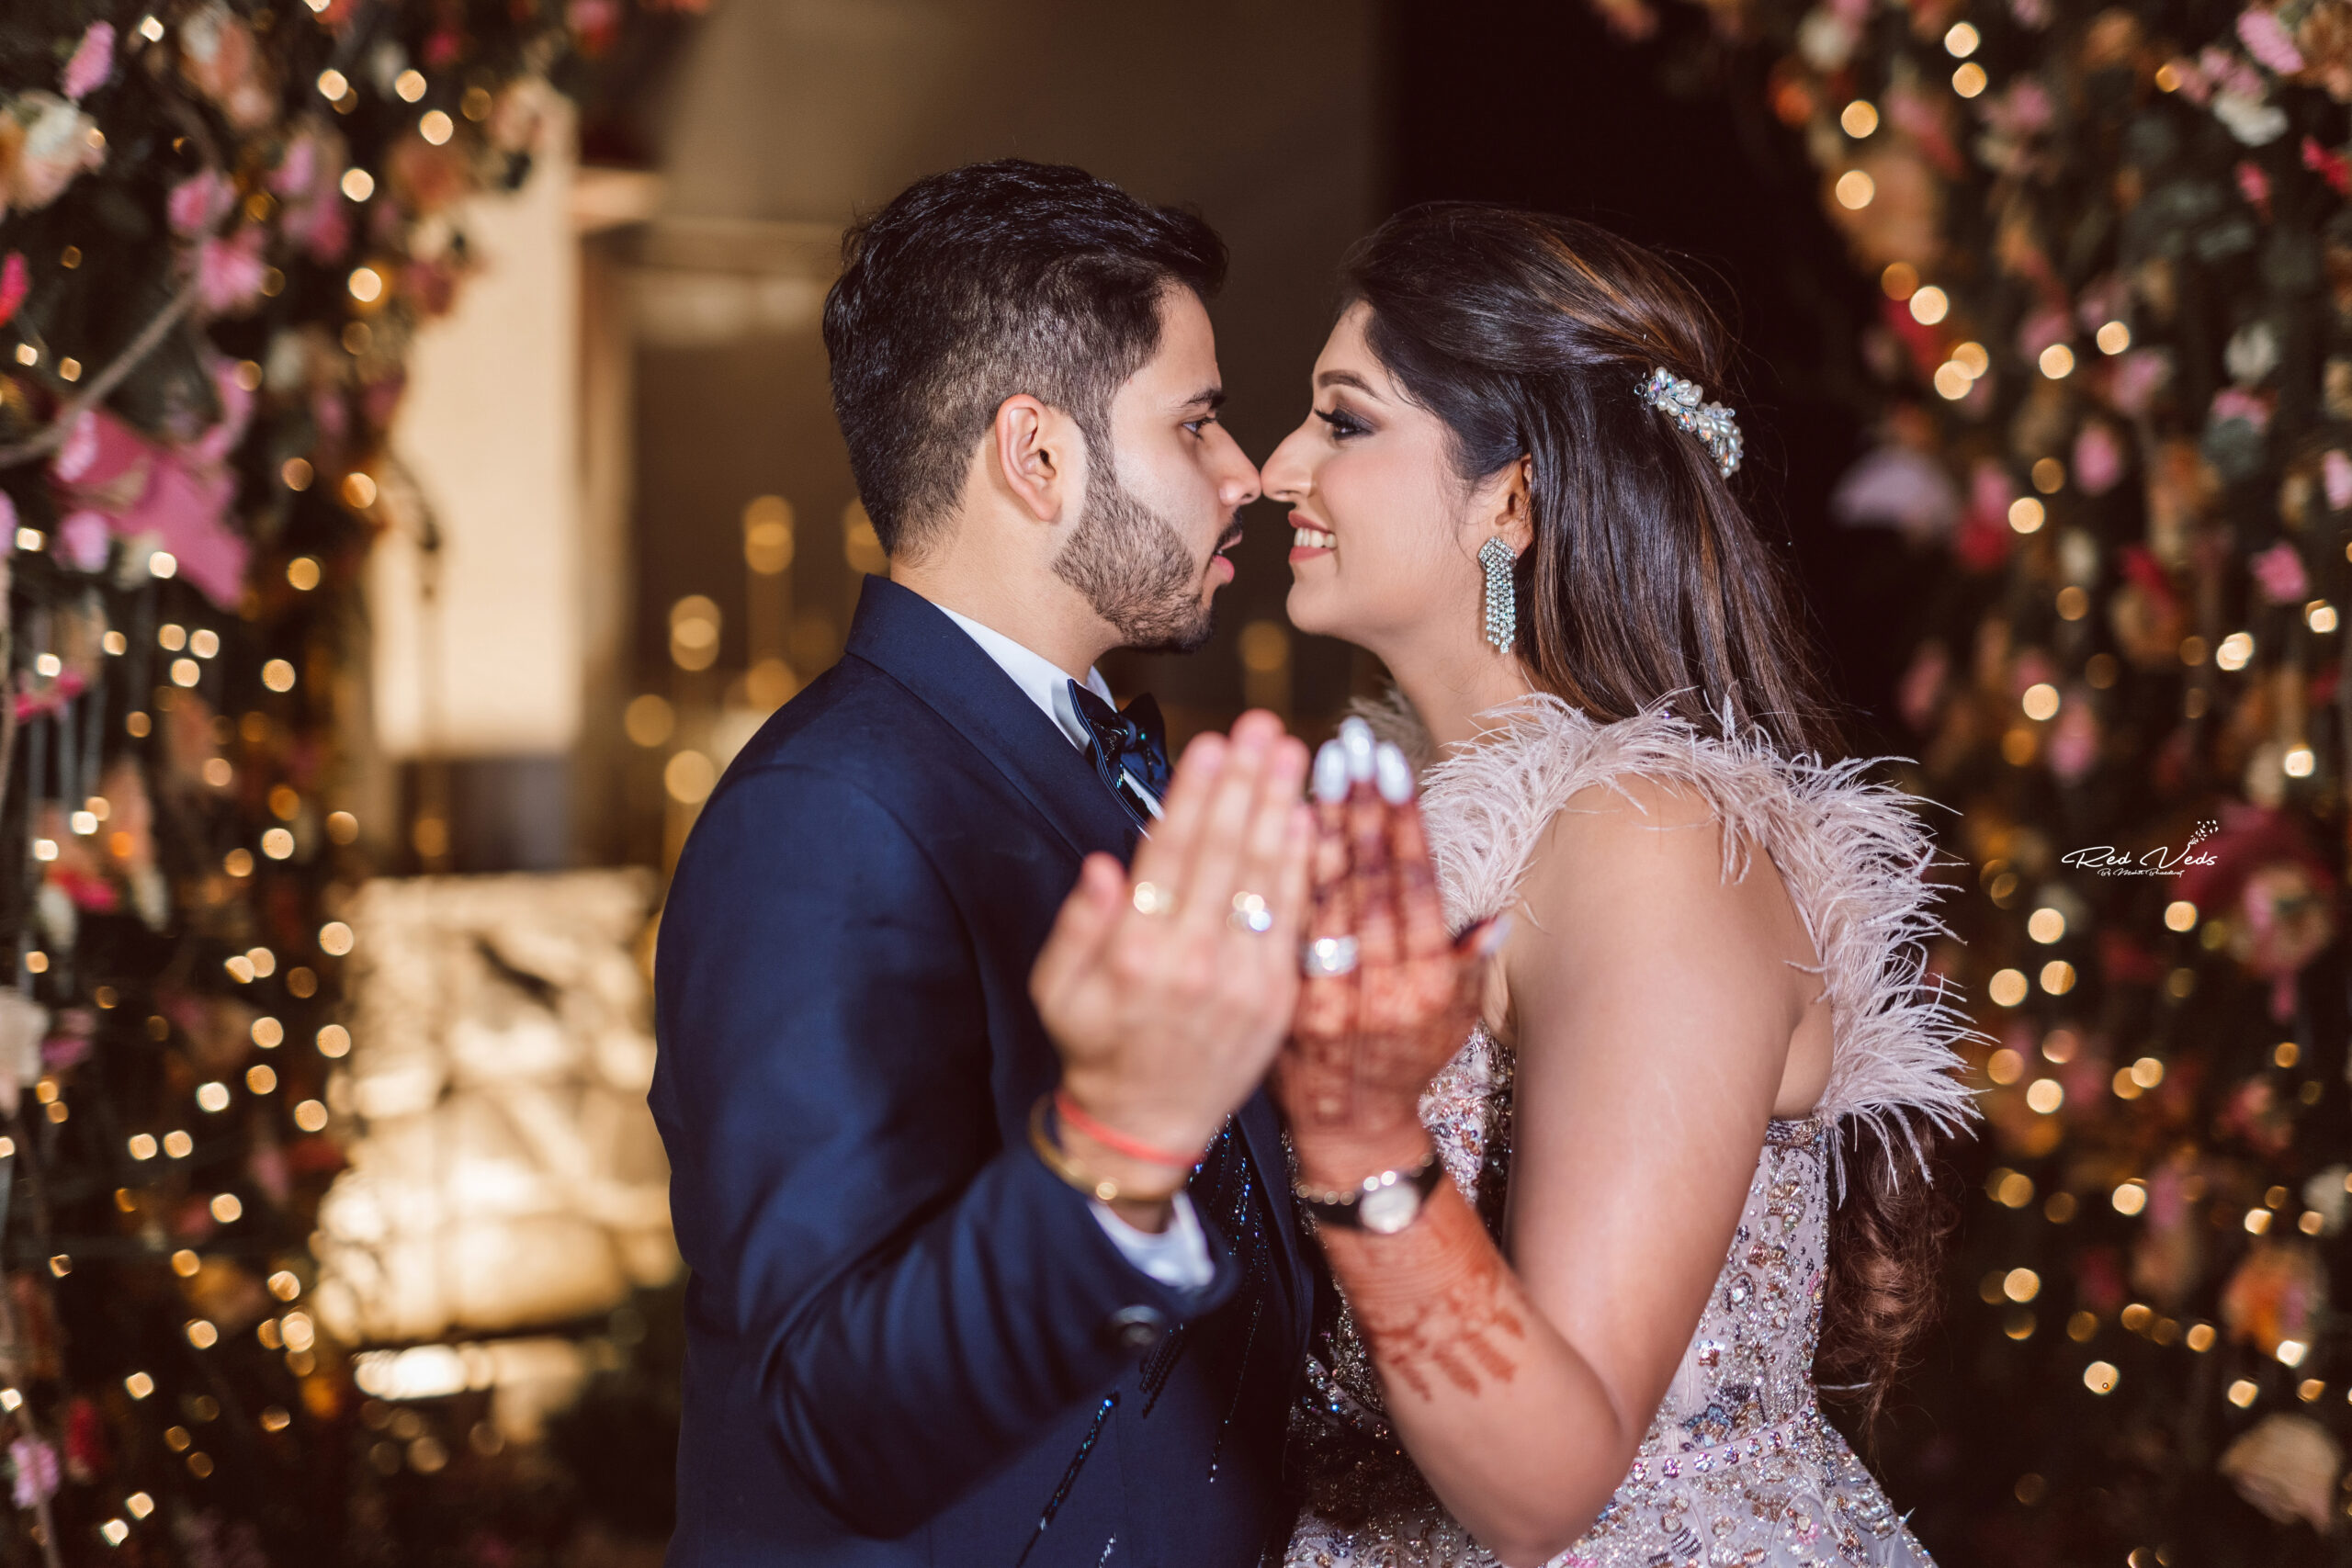 Free Photos - A Newlywed Couple Standing Close Together And Smiling,  Capturing Their Special Moment On Their Wedding Day. The Man And Woman, Who  Are The Bride And Groom, Are Surrounded By